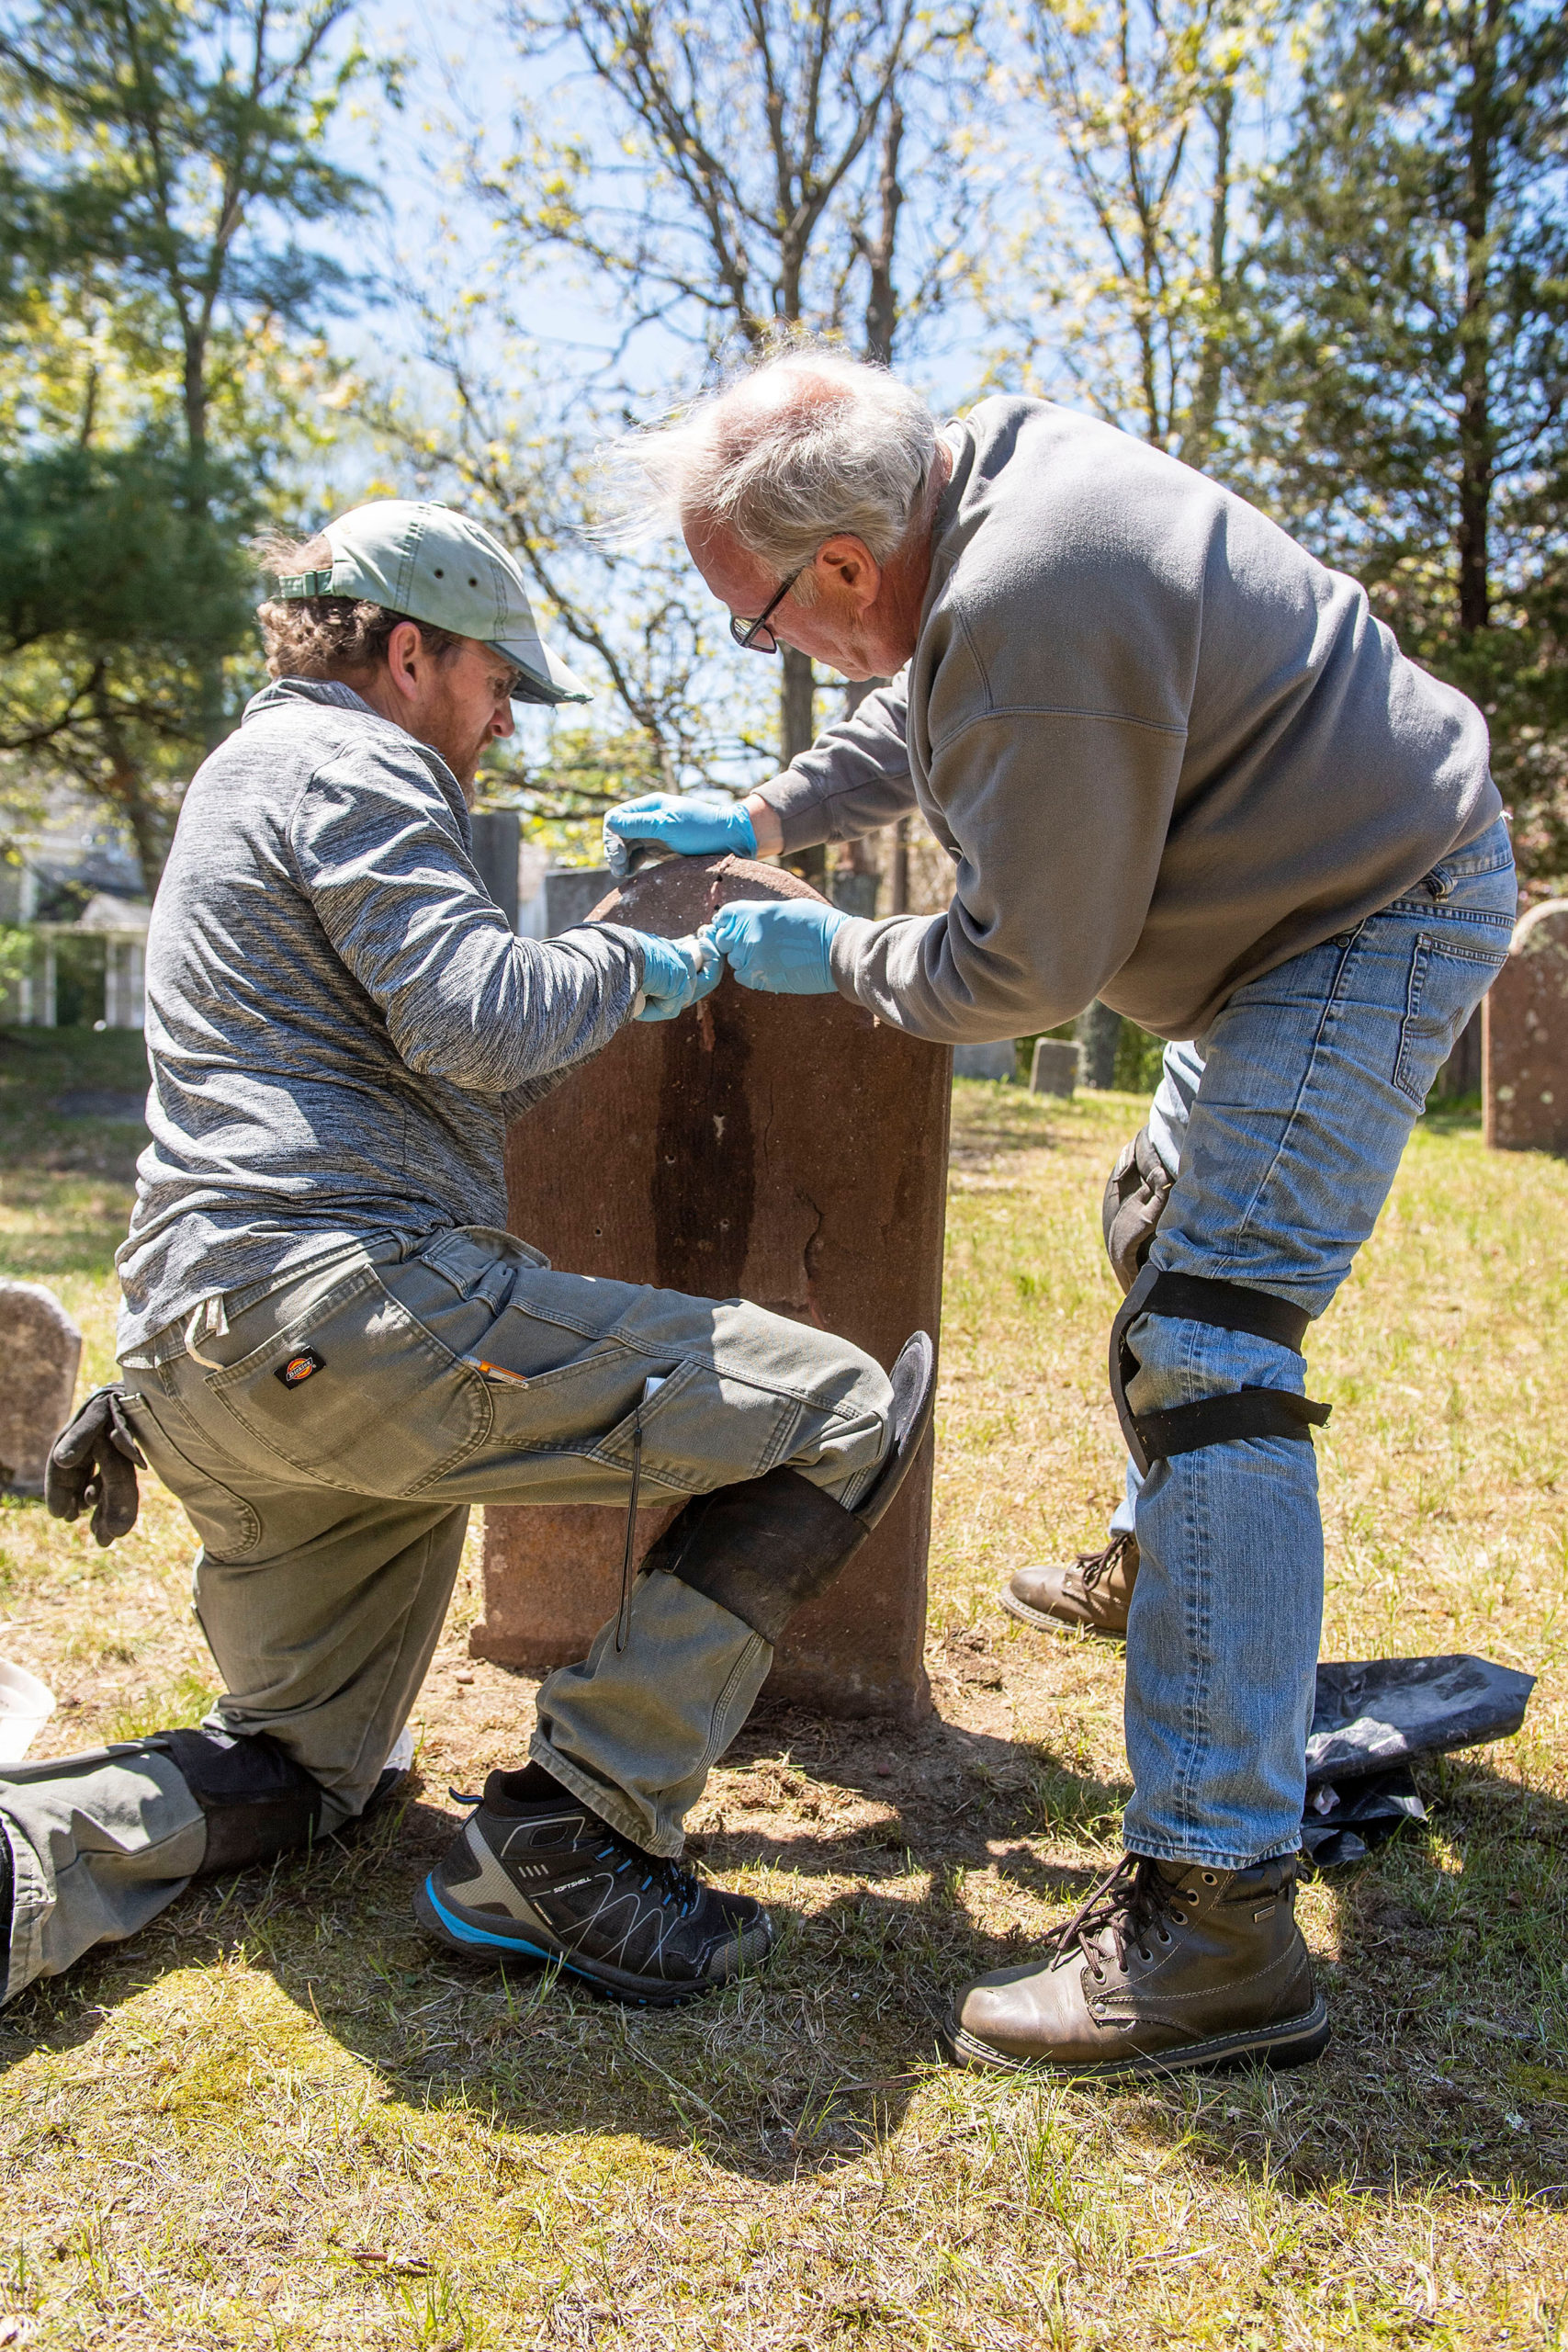 Materials Conservator Joel Snodgrass and Burying Ground Preservation Group Partner Zach Studenroth inject a liquid grout compound into a brownstone headstone during the early stages of the renovation and preservation process taking place at the Old Burying Ground adjacent to the Sag Harbor Old Whalers Church on May 11.     MICHAEL HELLER